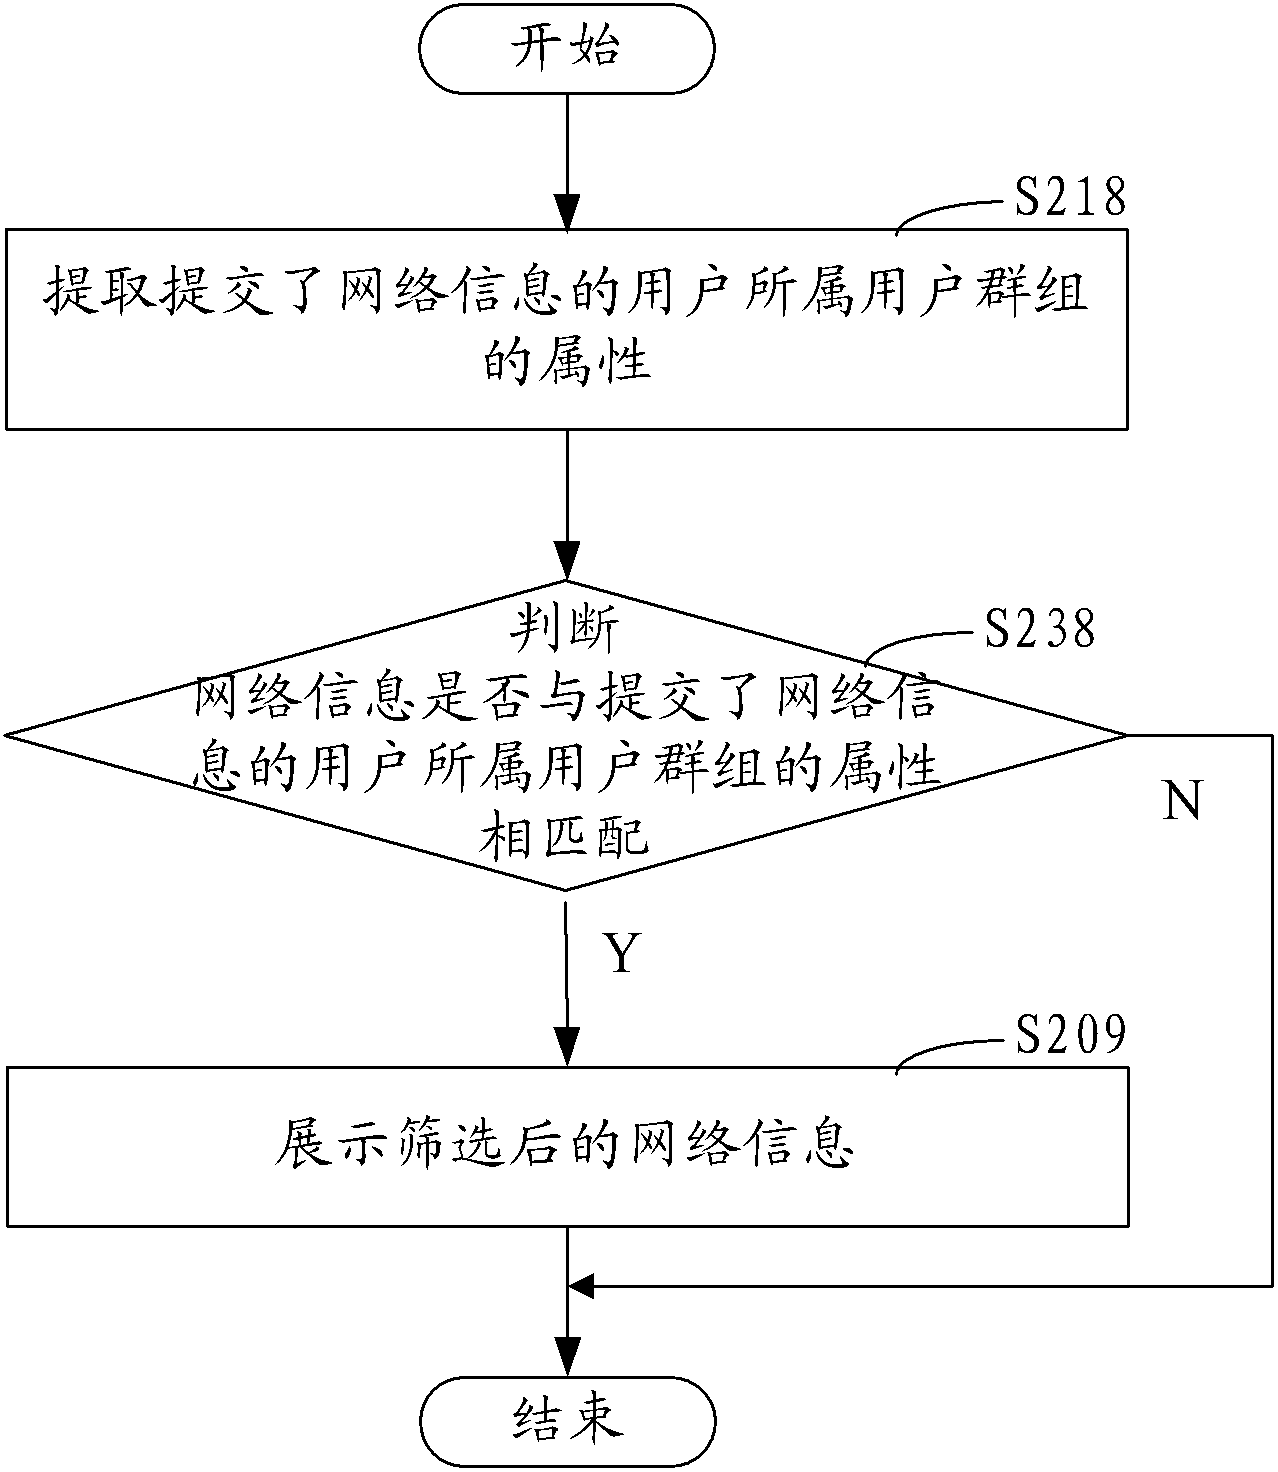 Method and system for sharing network information